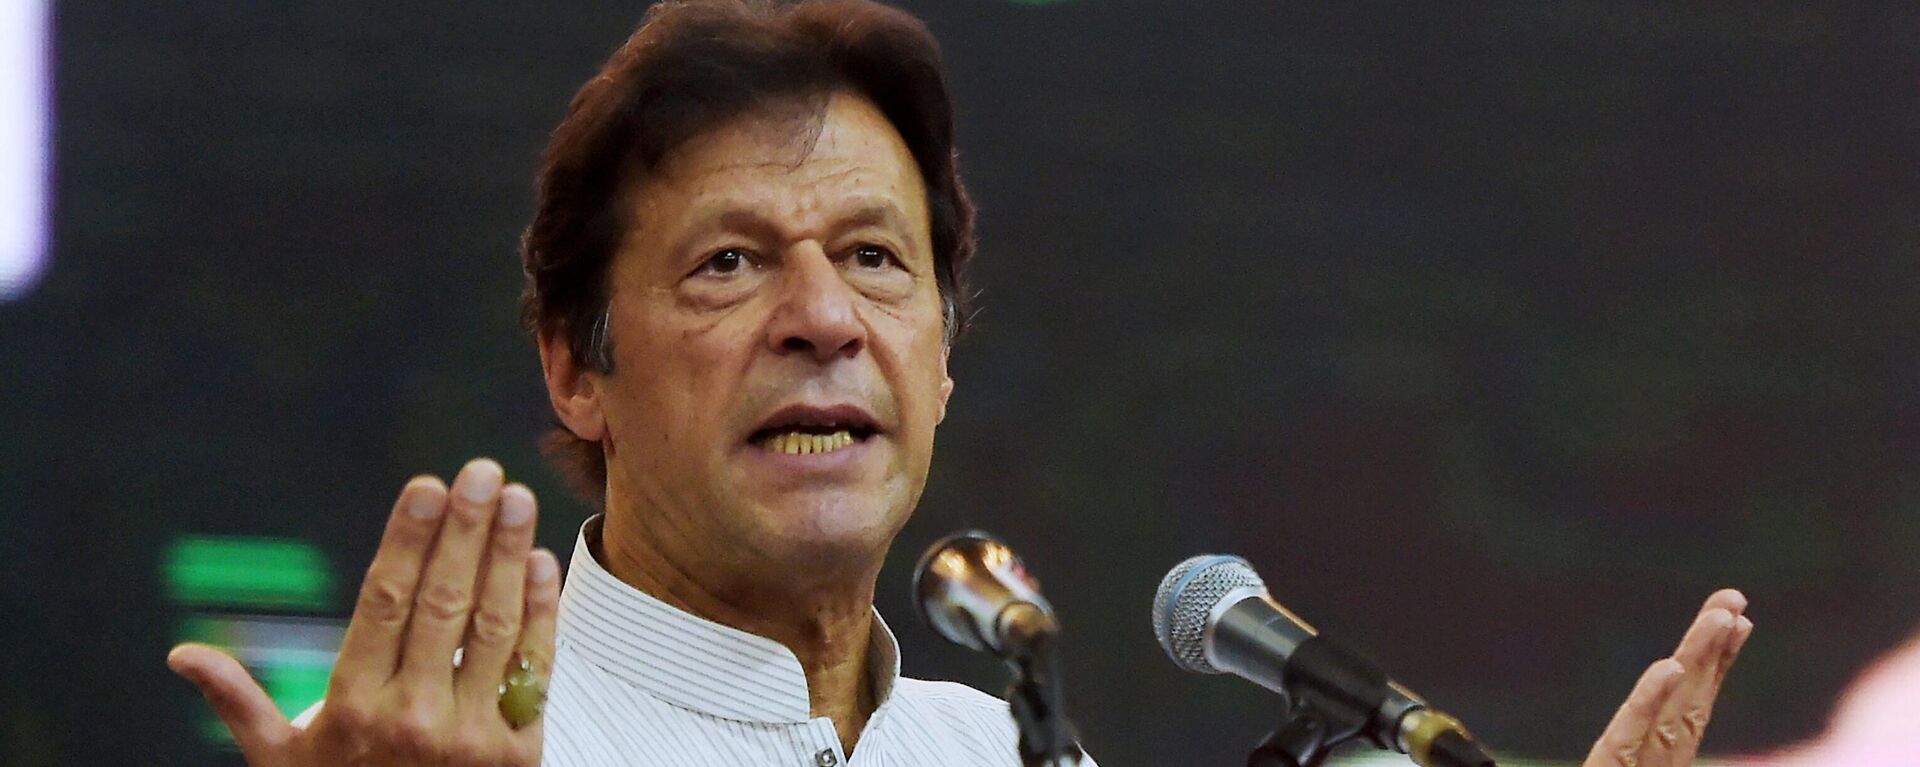 (FILES) This file photo taken on June 30, 2018 shows Pakistani cricketer-turned-politician and then-head of the Pakistan Tehreek-i-Insaf (PTI), Imran Khan, gesturing as he delivers a speech during an election campaign rally in Islamabad - Sputnik International, 1920, 14.04.2022